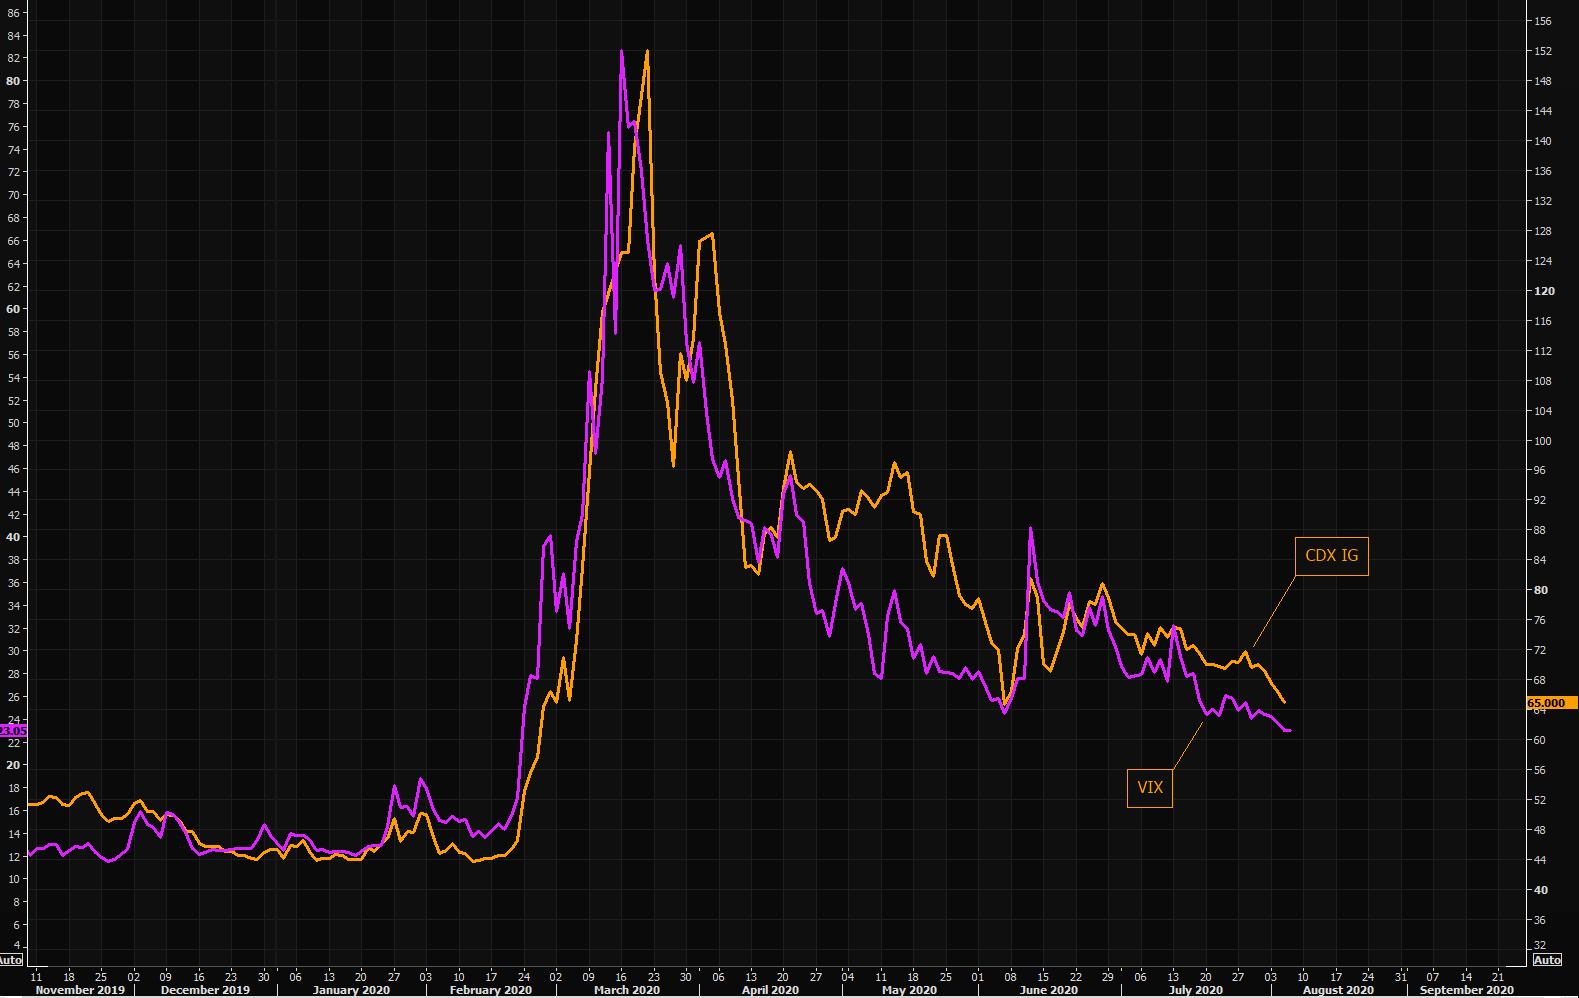 Sucking risk premium out of the market - US credit protection and VIX making new post Corona lows